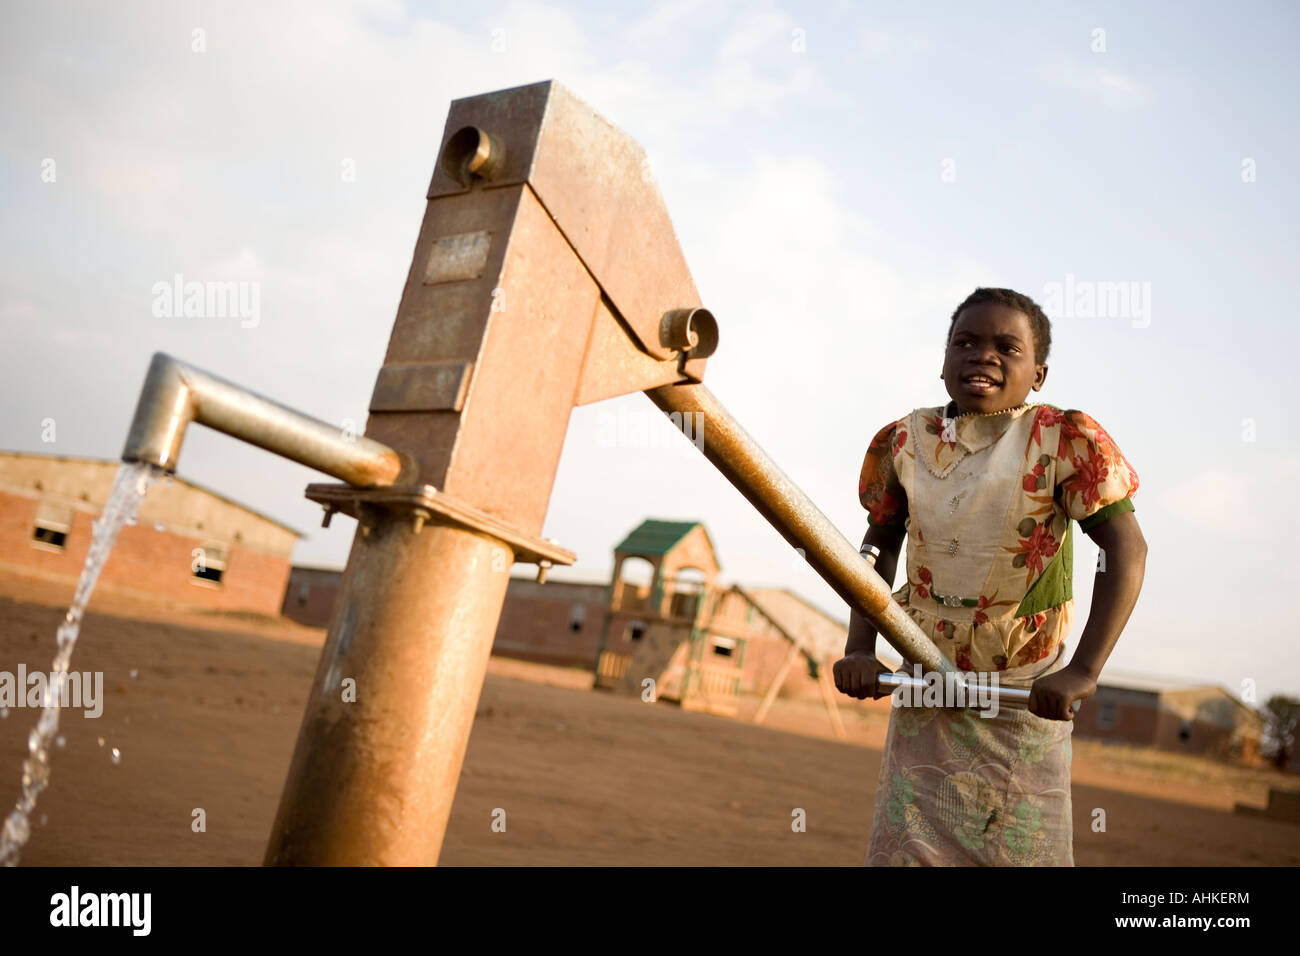 Orphan child drawing water from a well in Malawi, Africa Stock Photo